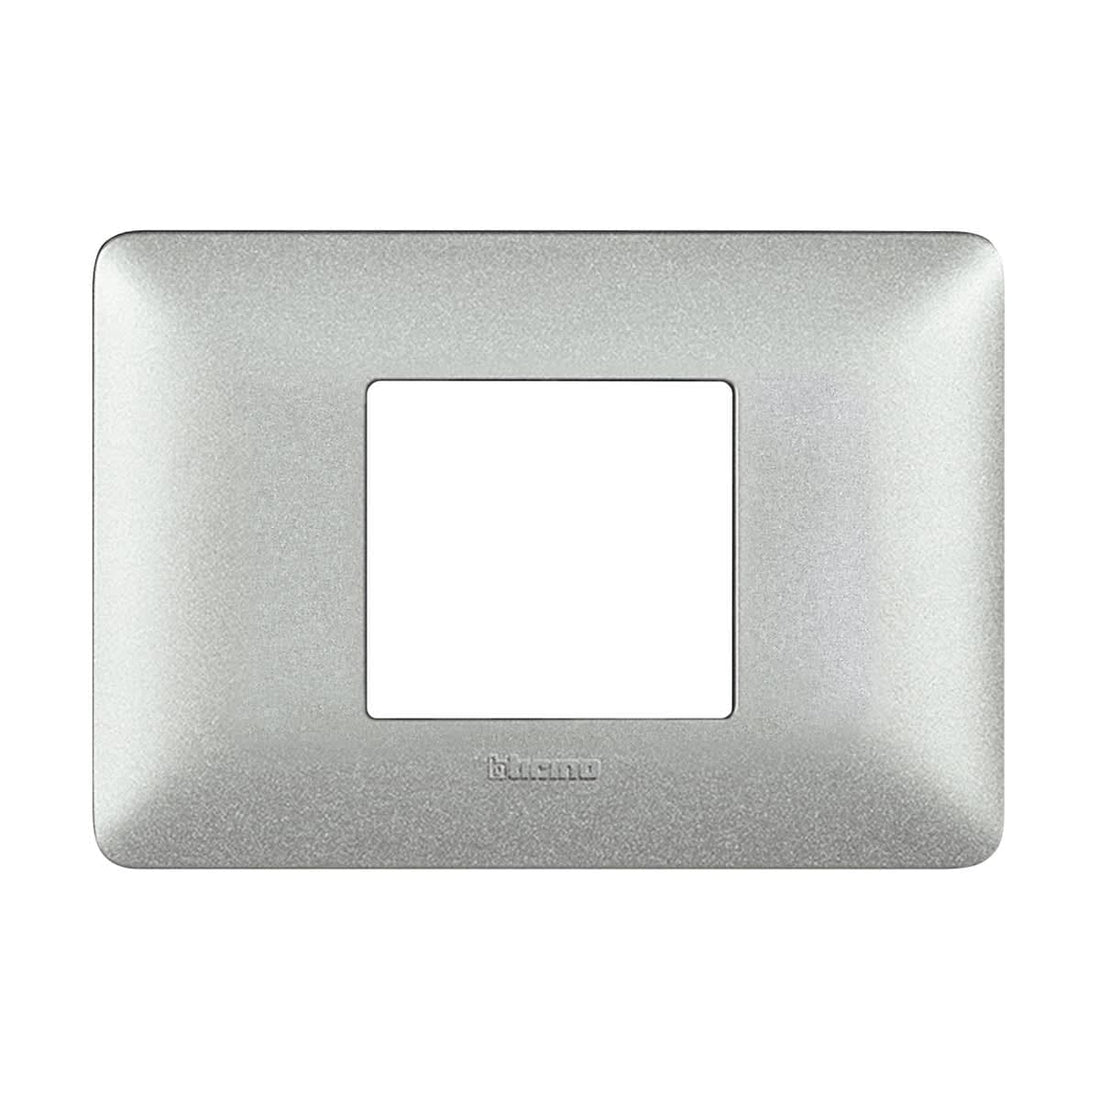 MATIX PLATE 2 PLACES CENTRED WHITE LIME - best price from Maltashopper.com BR420100057